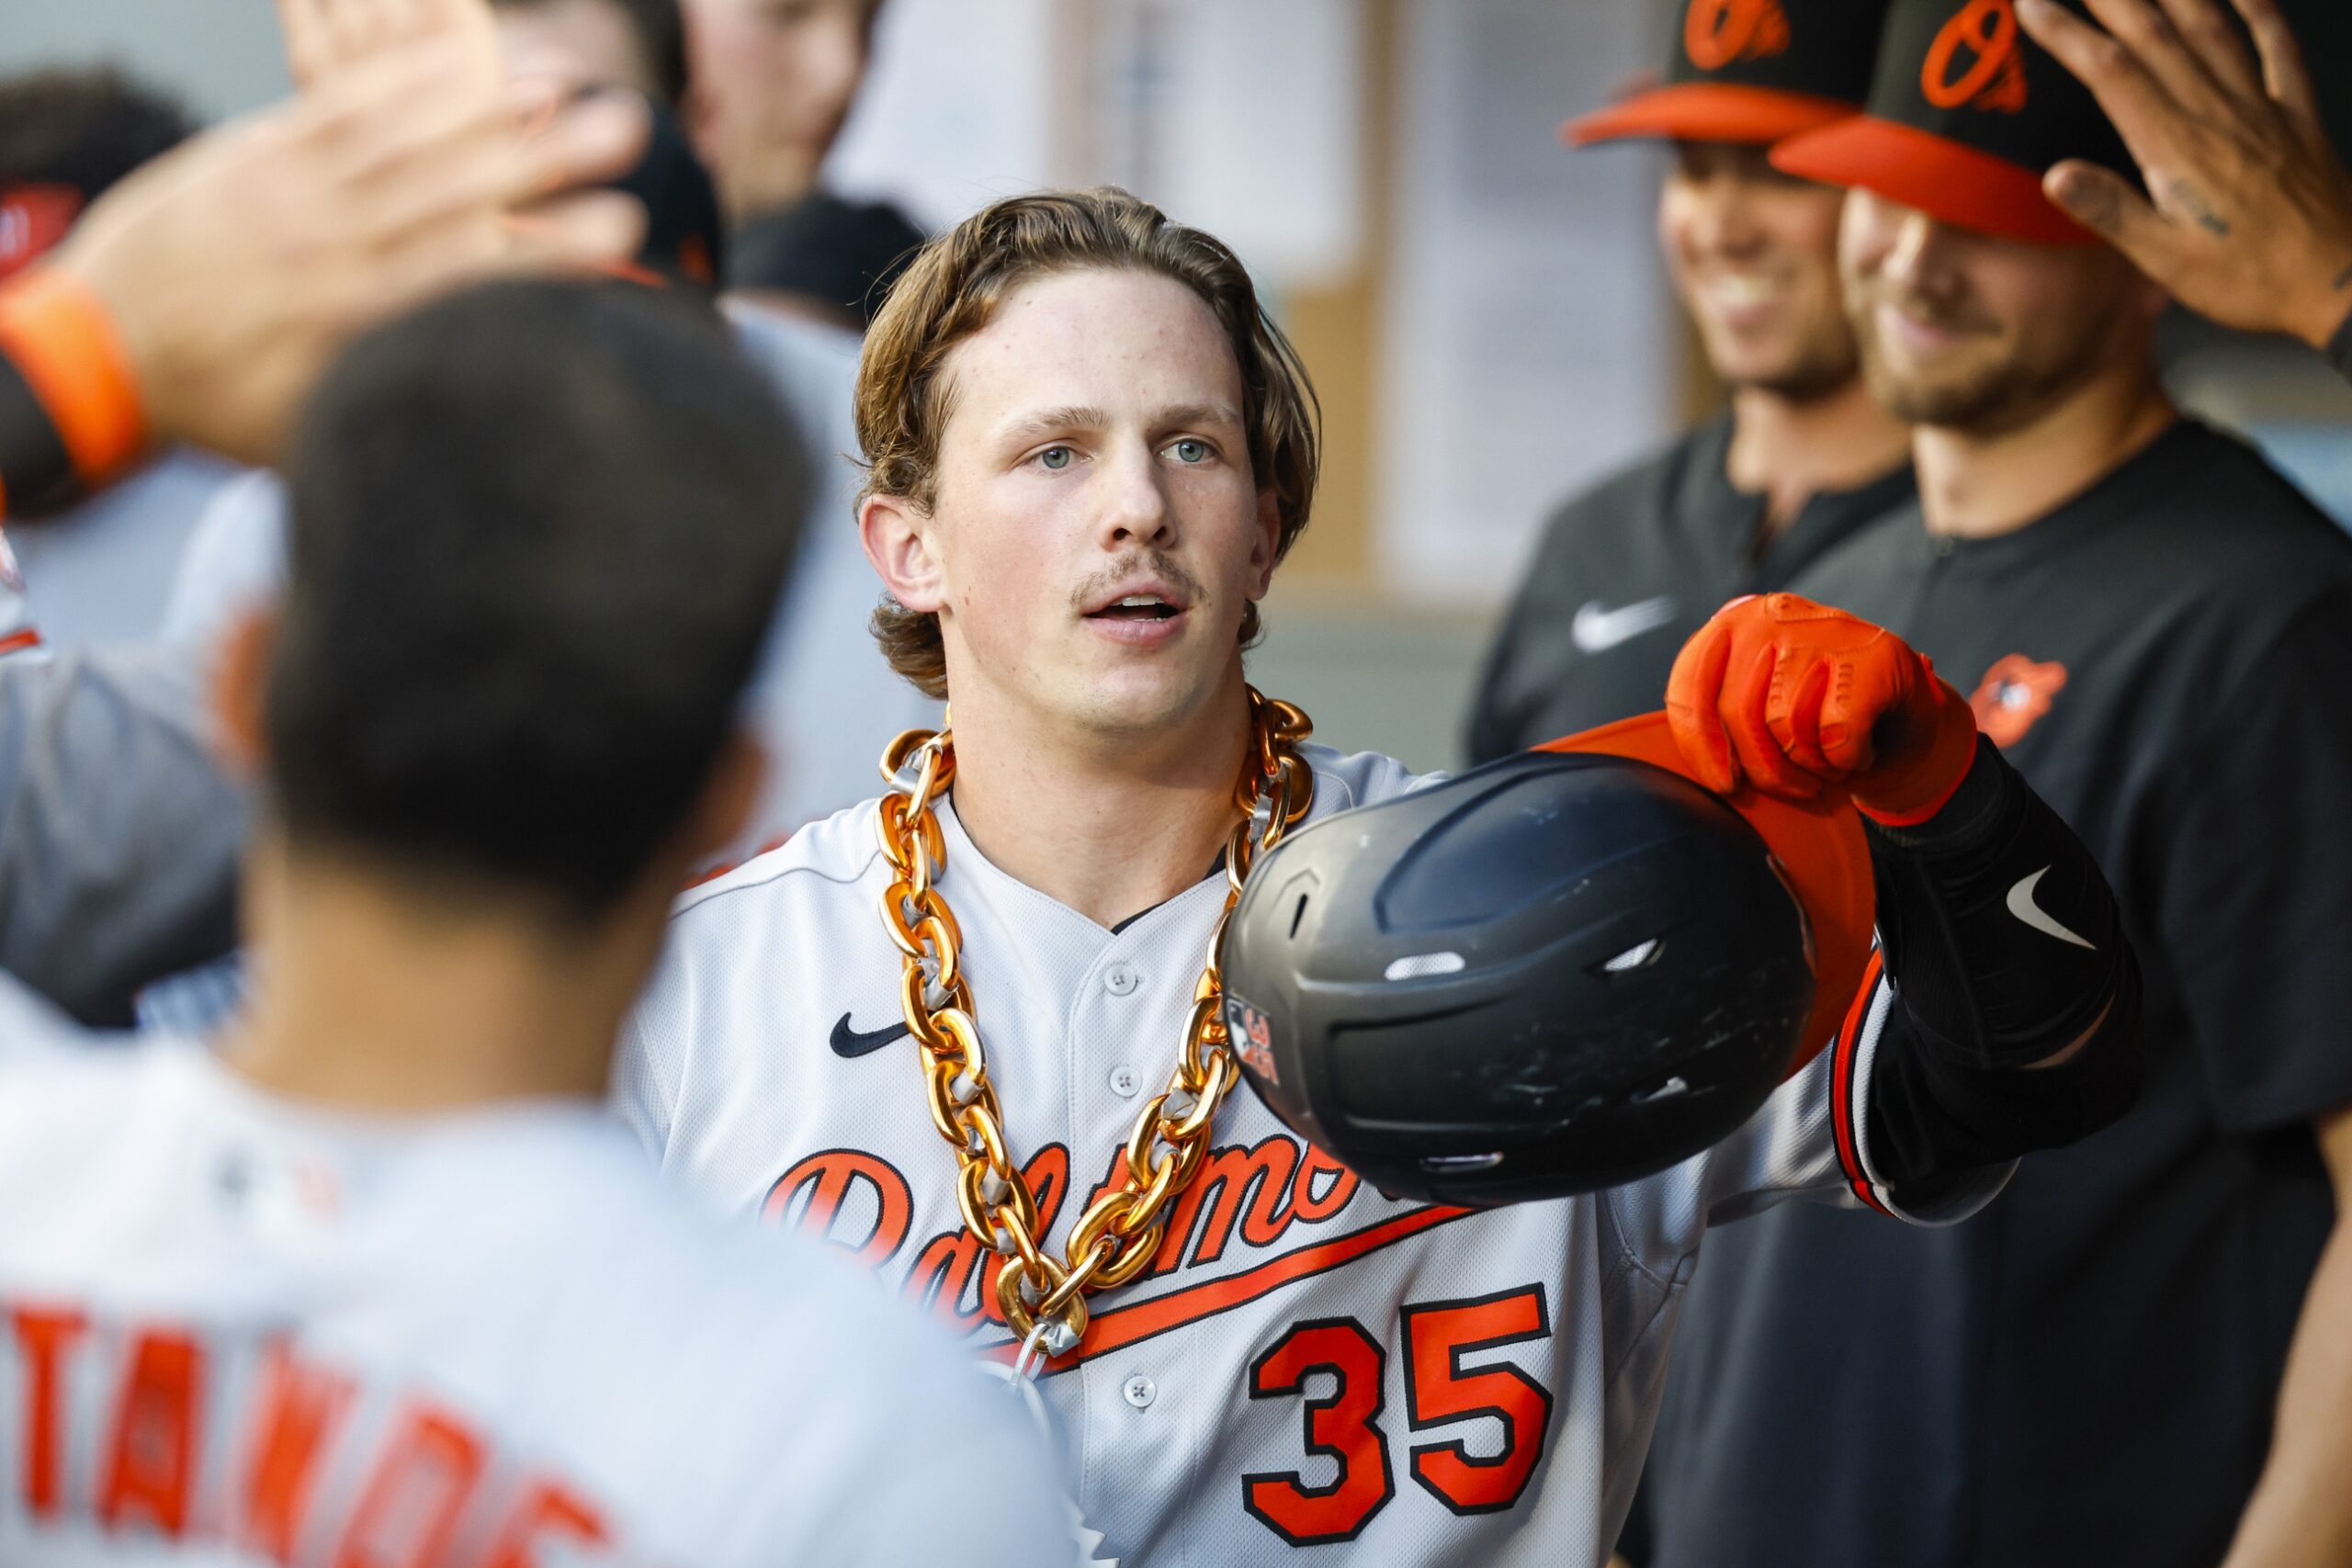 Know your Orioles 40-man: Dean Kremer - Camden Chat